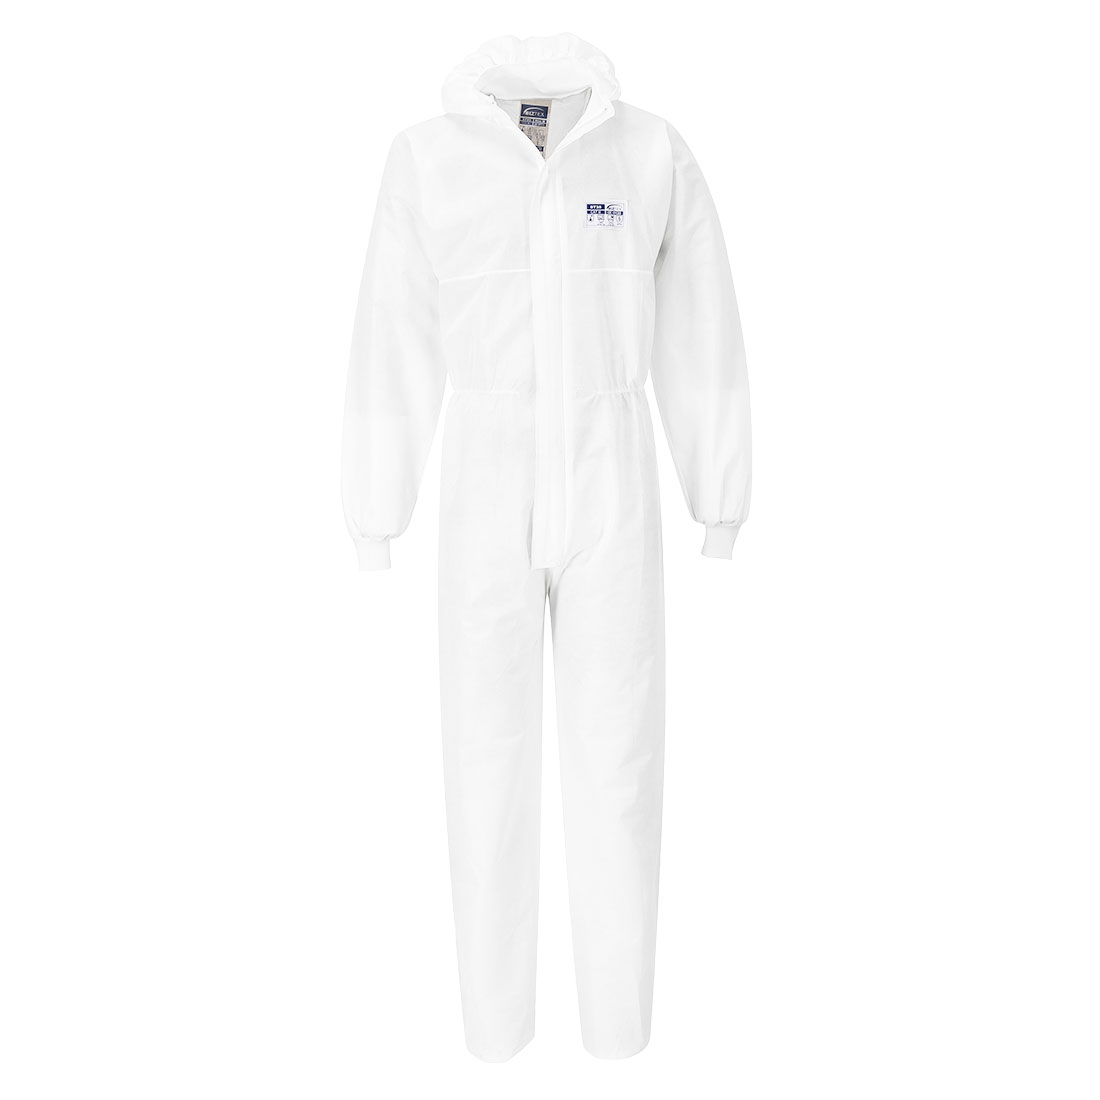 BizTex SMS Coverall With Knitted Cuff Type 5/6 Velikost: M, Barva: white